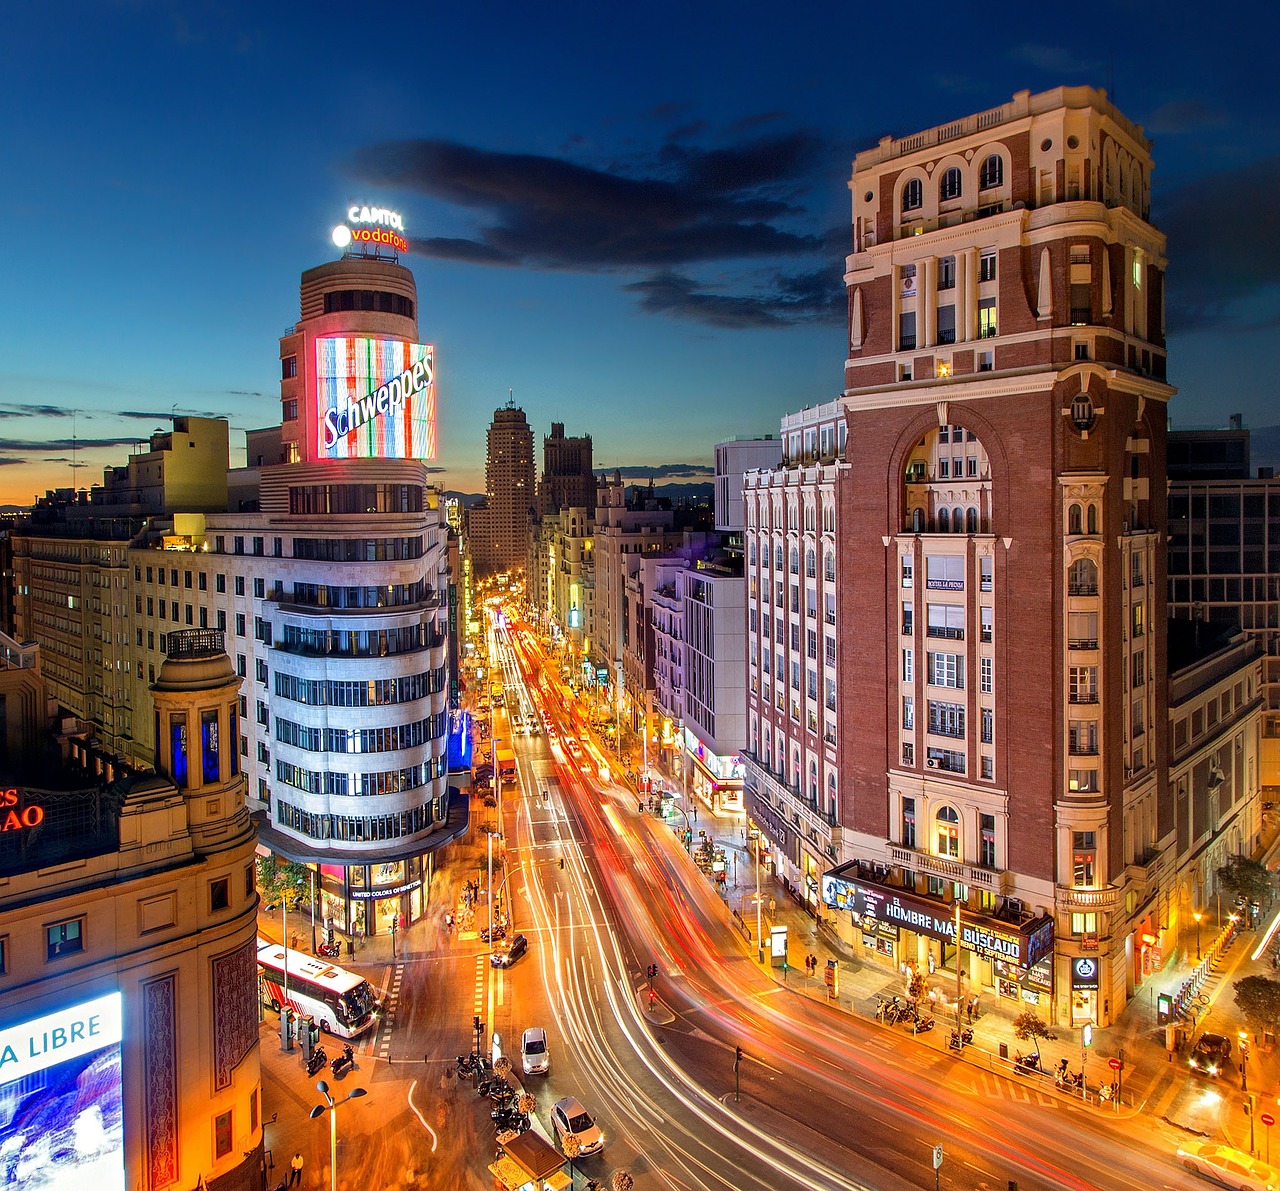 Madrid's Cultural Gems and Gastronomic Delights